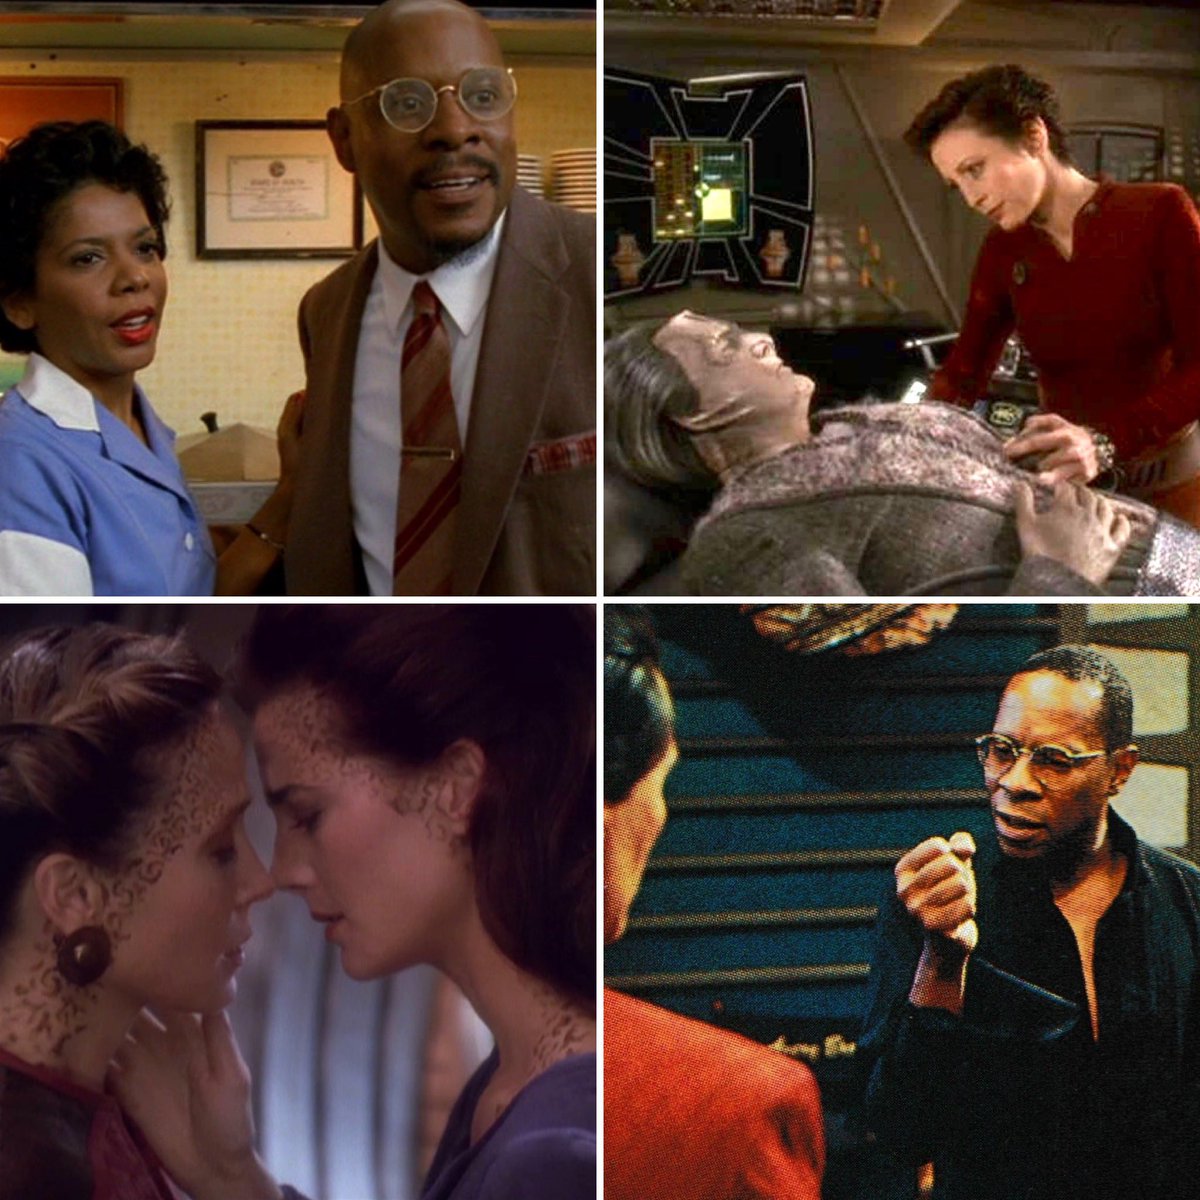 One of #StarTrek’s biggest talents. #AveryBrooks brought dignity, strength, vulnerability, and representation to the franchise - not only with his role as Ben Sisko on #DeepSpaceNine, but behind the camera too, directing some truly moving and definitive episodes. #TheSiskoDay 🖖🏽